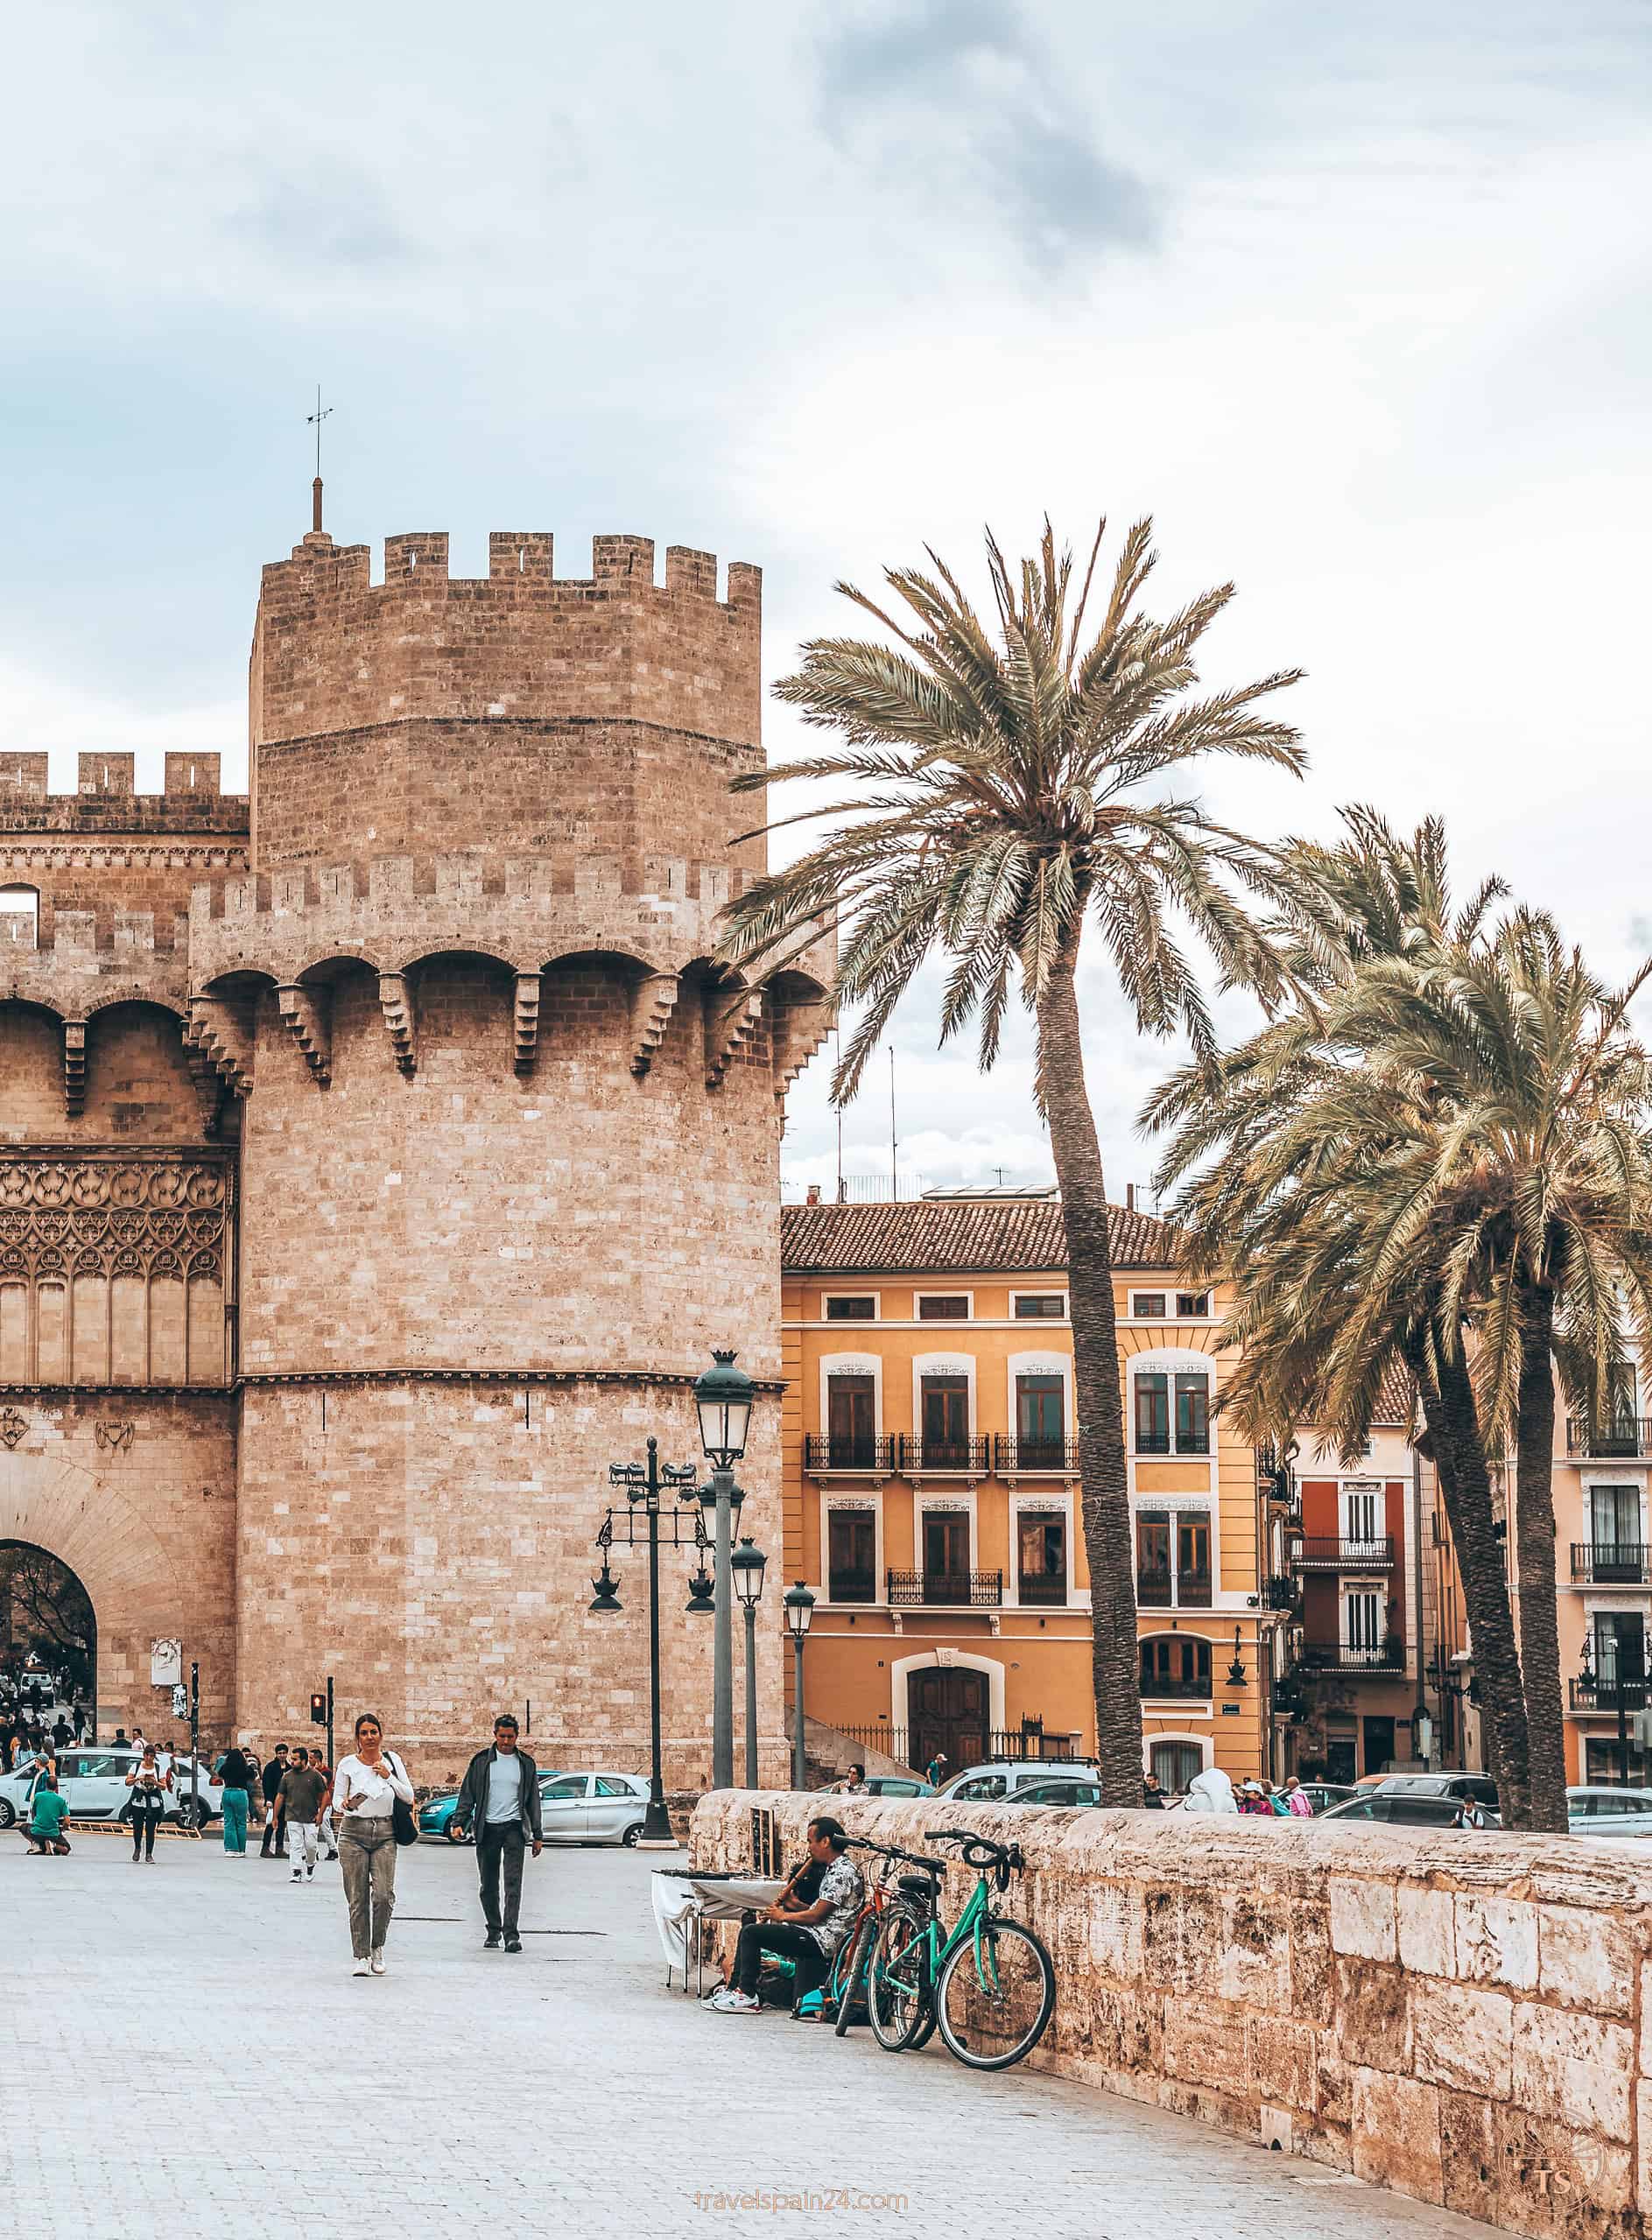 Close-up of the right tower of the Serranos Towers in Valencia, with people relaxing by the bridge wall, palm trees, passing cars, and light clouds setting a vibrant scene.